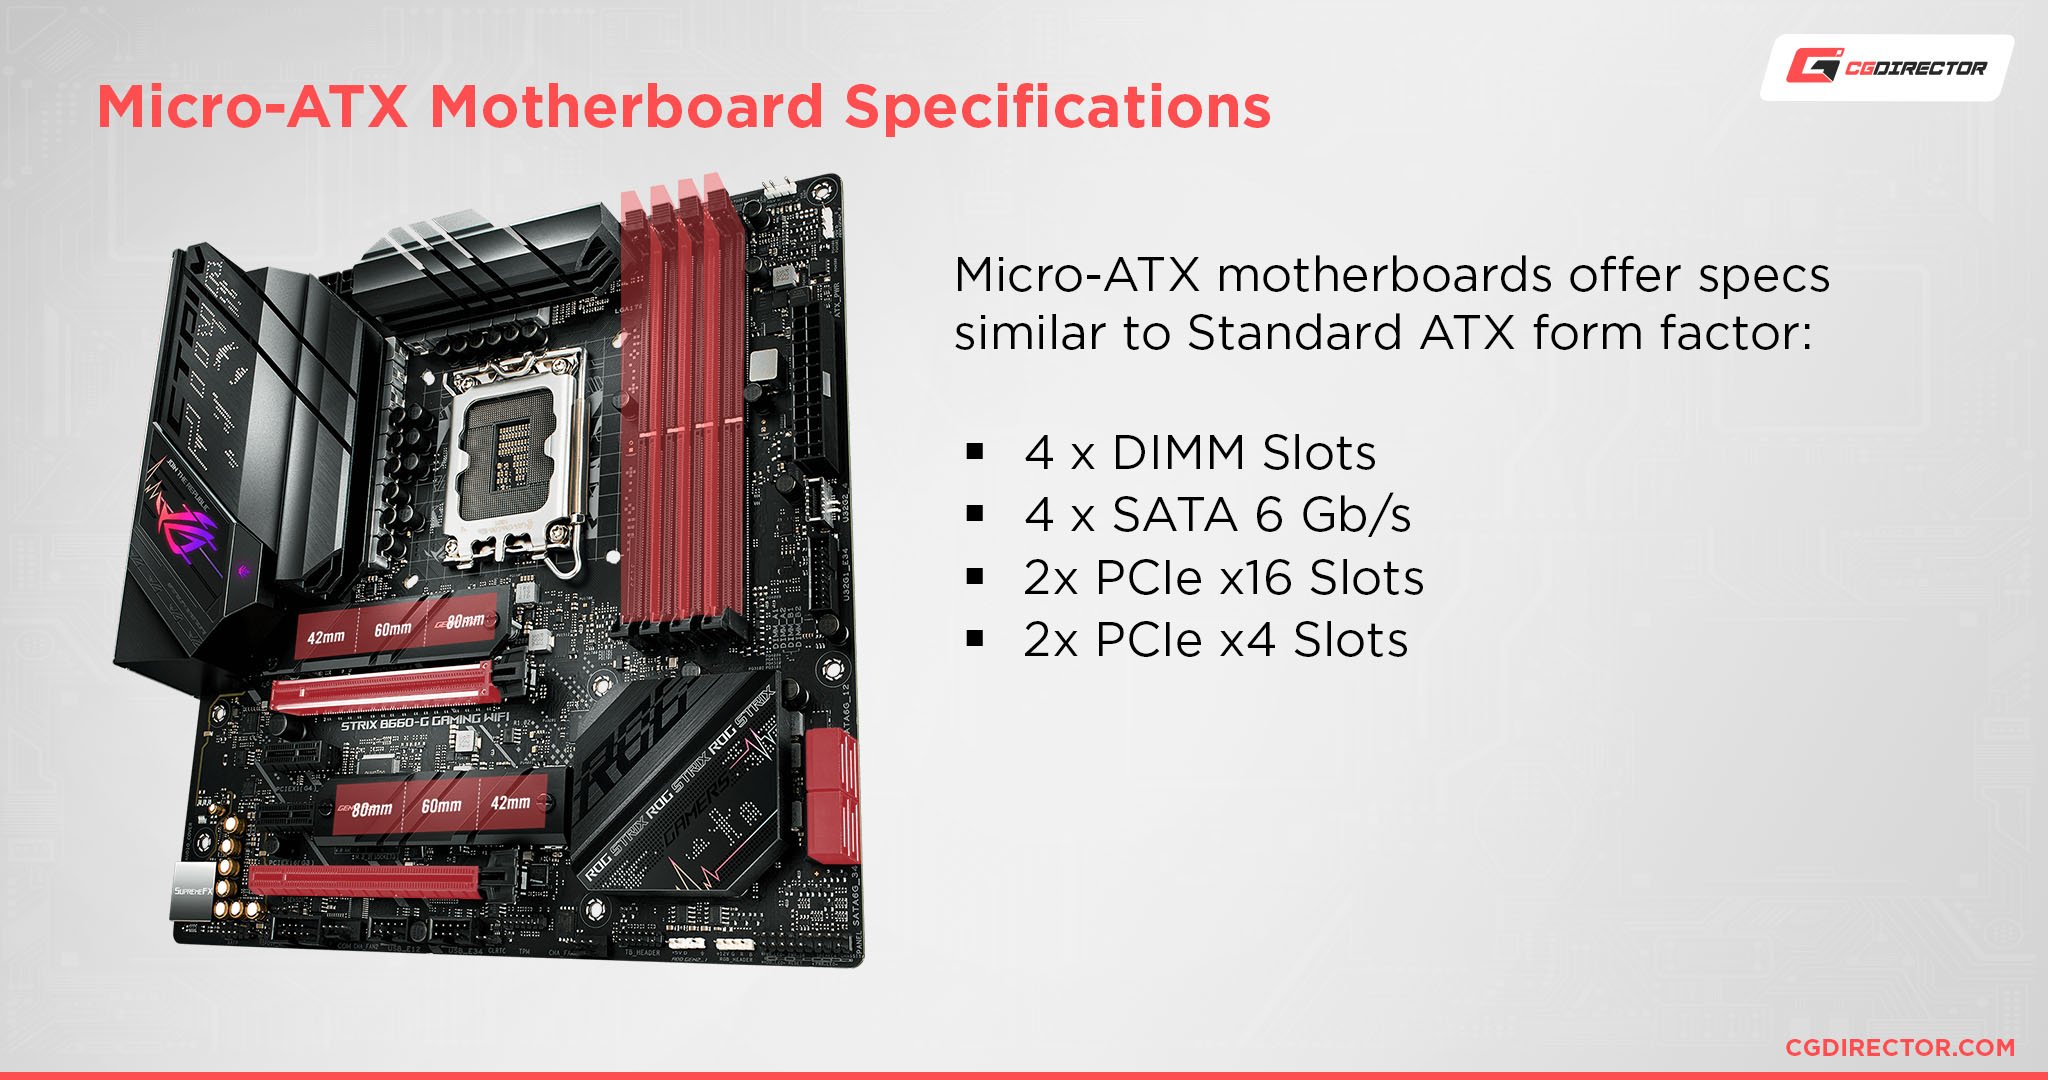 What is a Mini-ITX motherboard? A Brief Breakdown of Motherboard Sizes